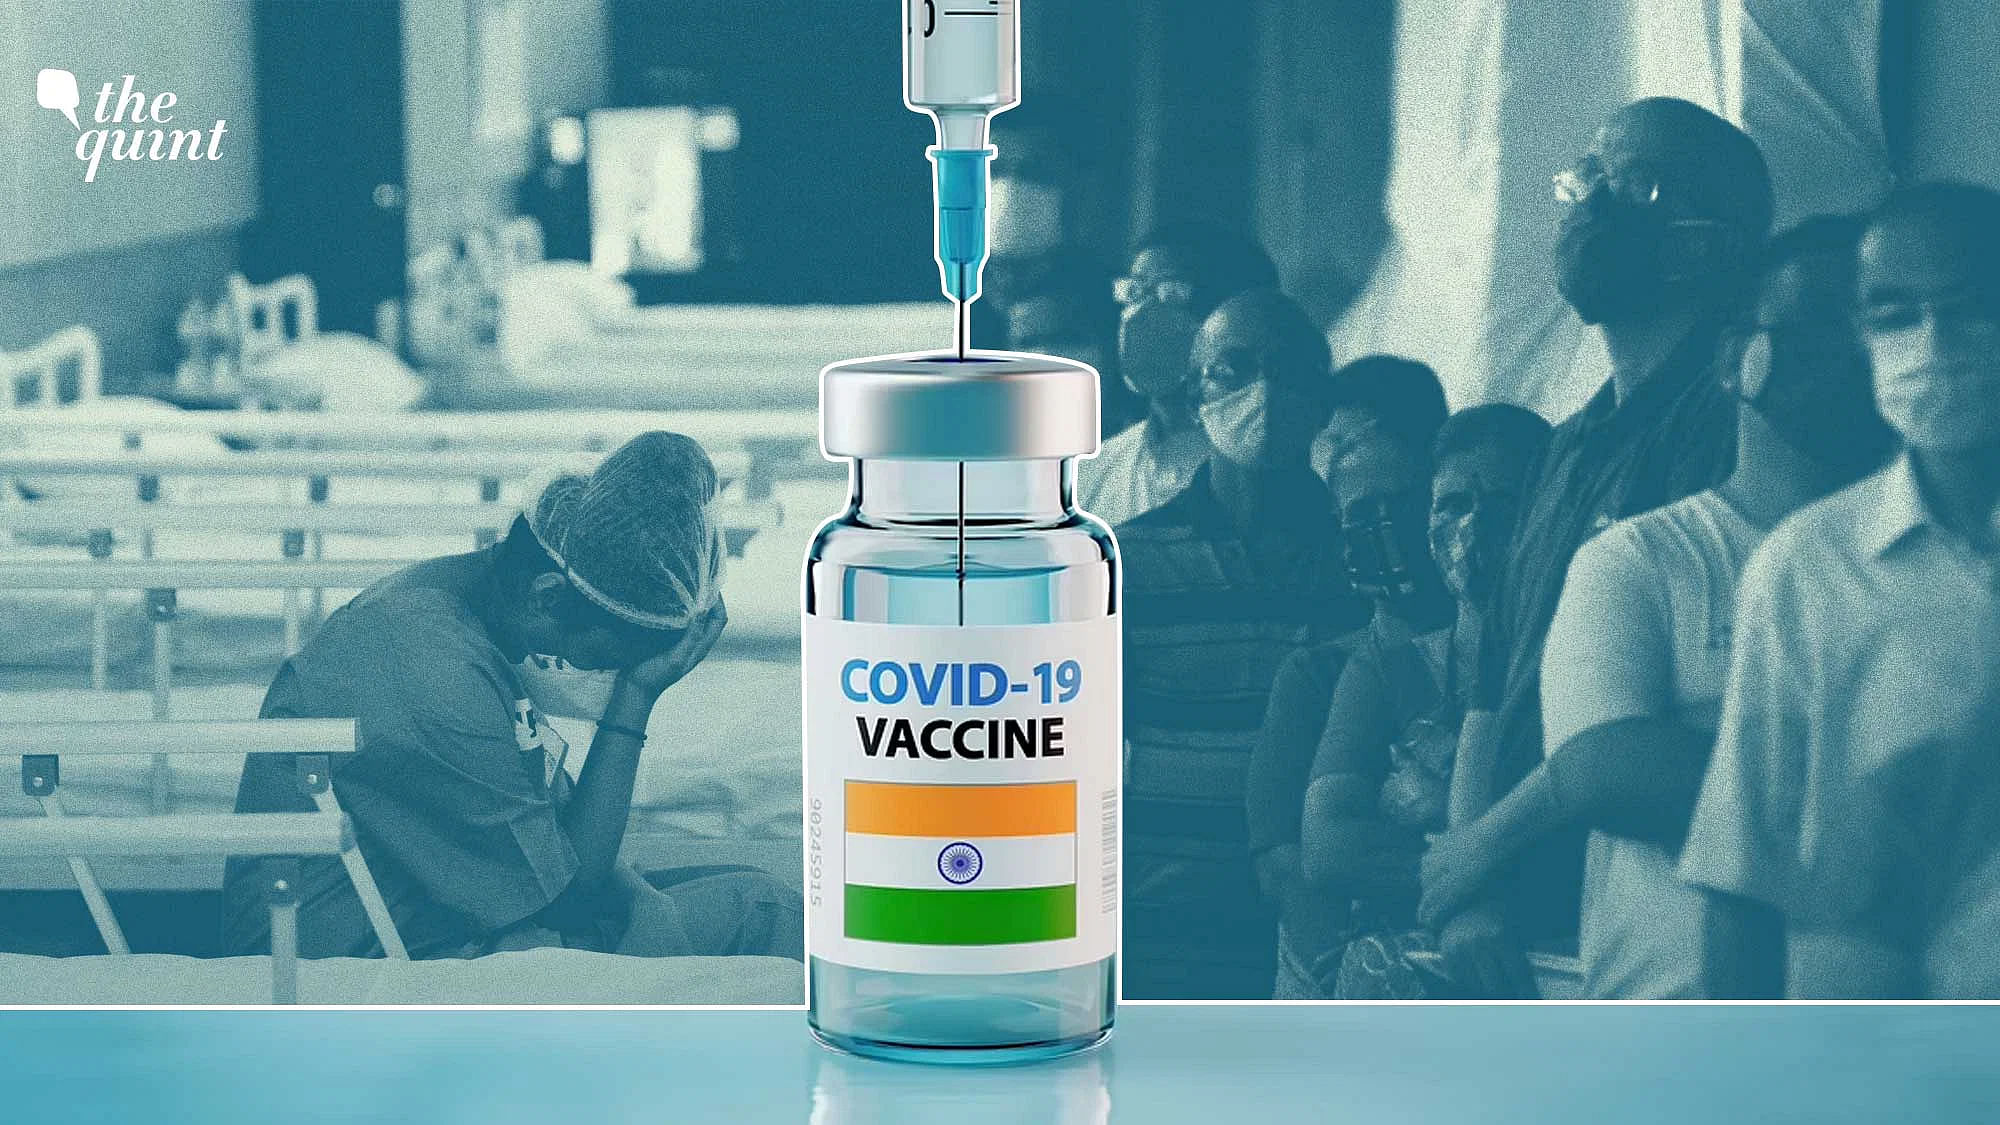 <div class="paragraphs"><p>Brihanmumbai Municipal Corporation (BMC) chief Mangala Gomare confirmed the milestone, which was achieved around 14 months after the vaccination programme against COVID-19 began in India.</p></div>